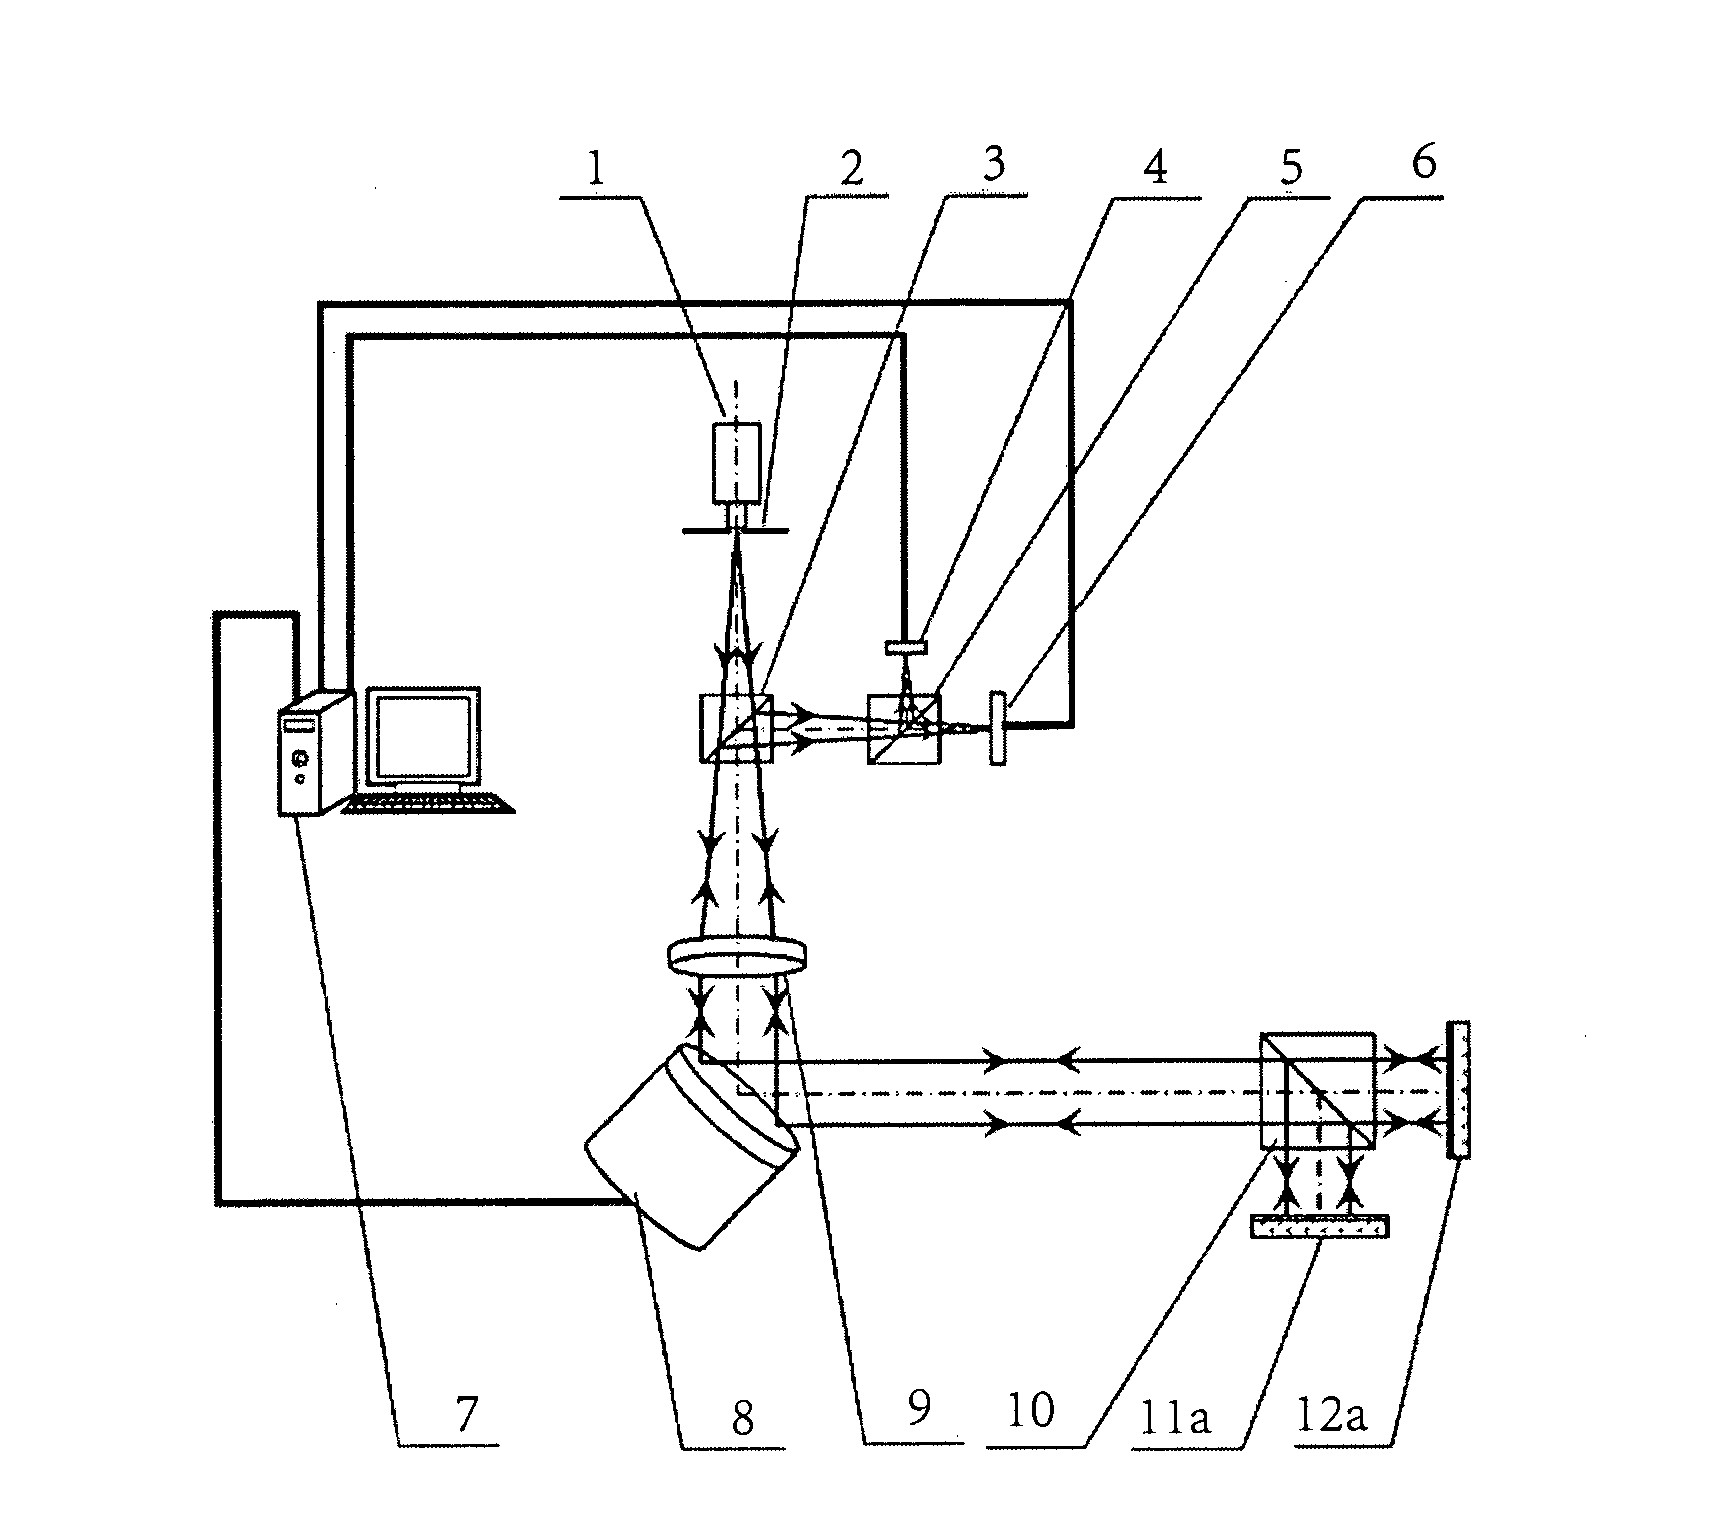 Photoelectric autocollimation method and apparatus based on beam drift compensation